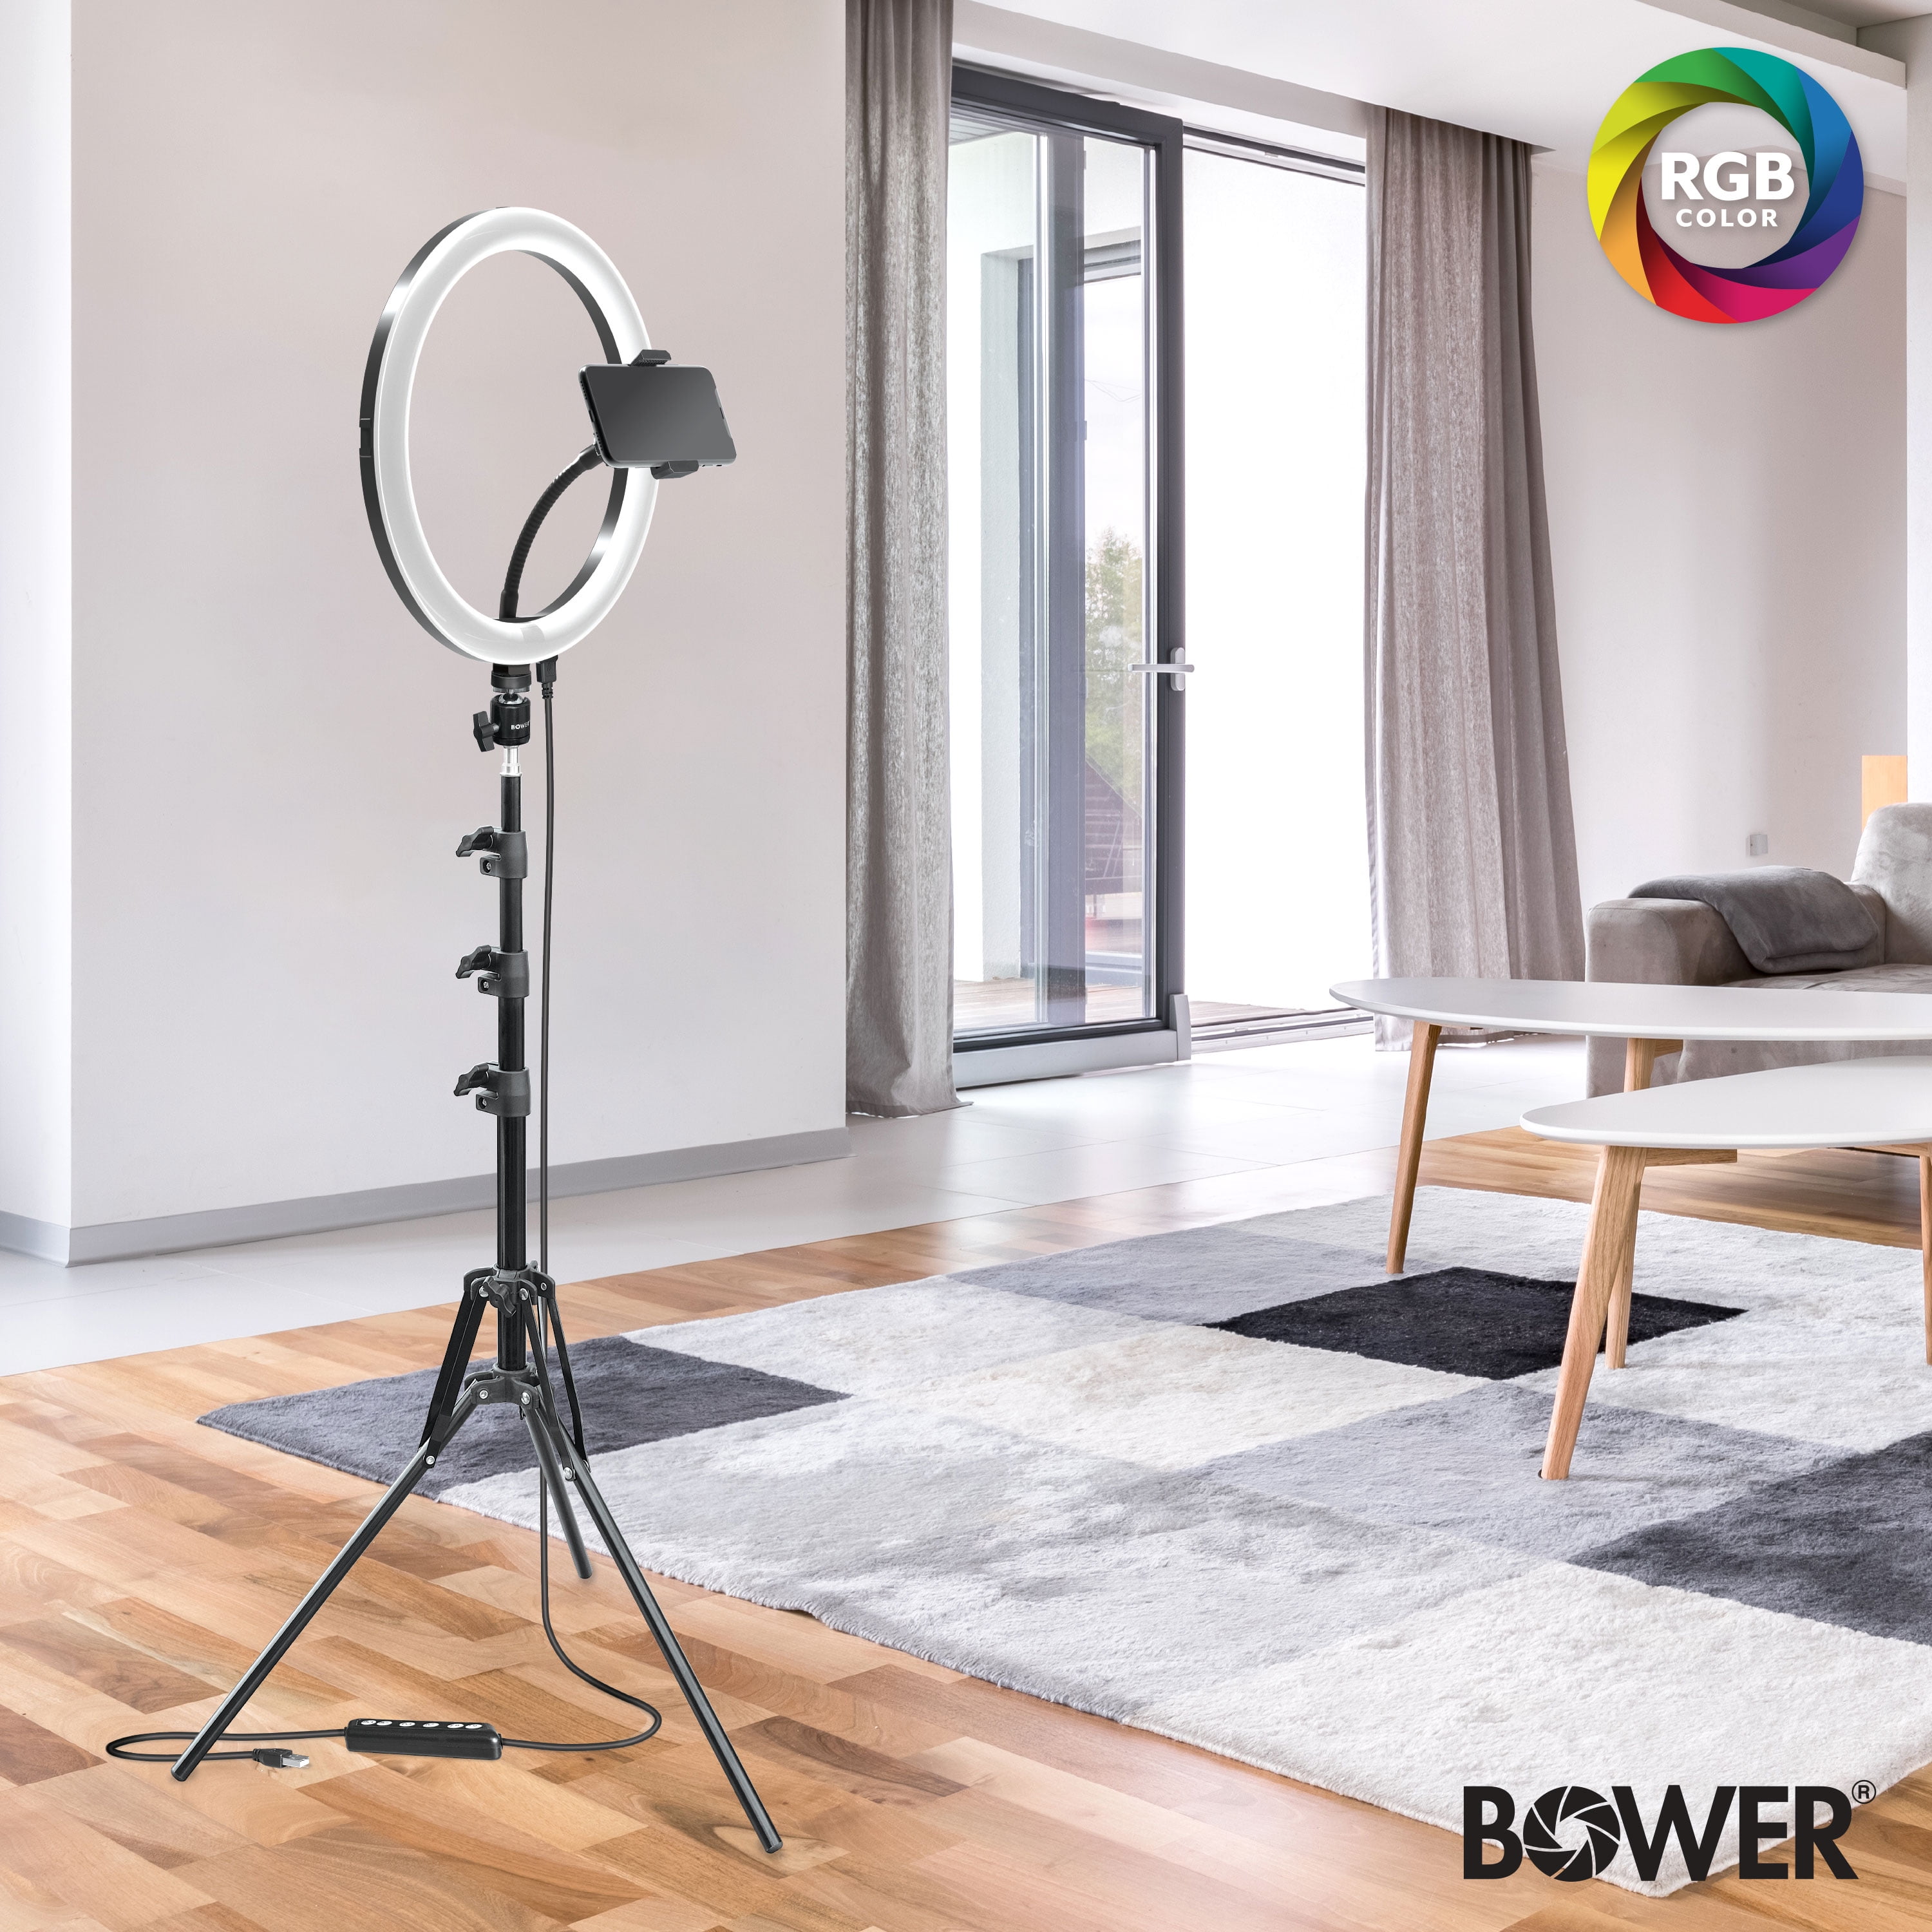 UBeesize 12?? led Ring Light with Tripod Stand and Phone Holder, Selfie Ring  Light for Video conferencing, Compatible with iPhone&Android Phones&Cameras  - Walmart.com